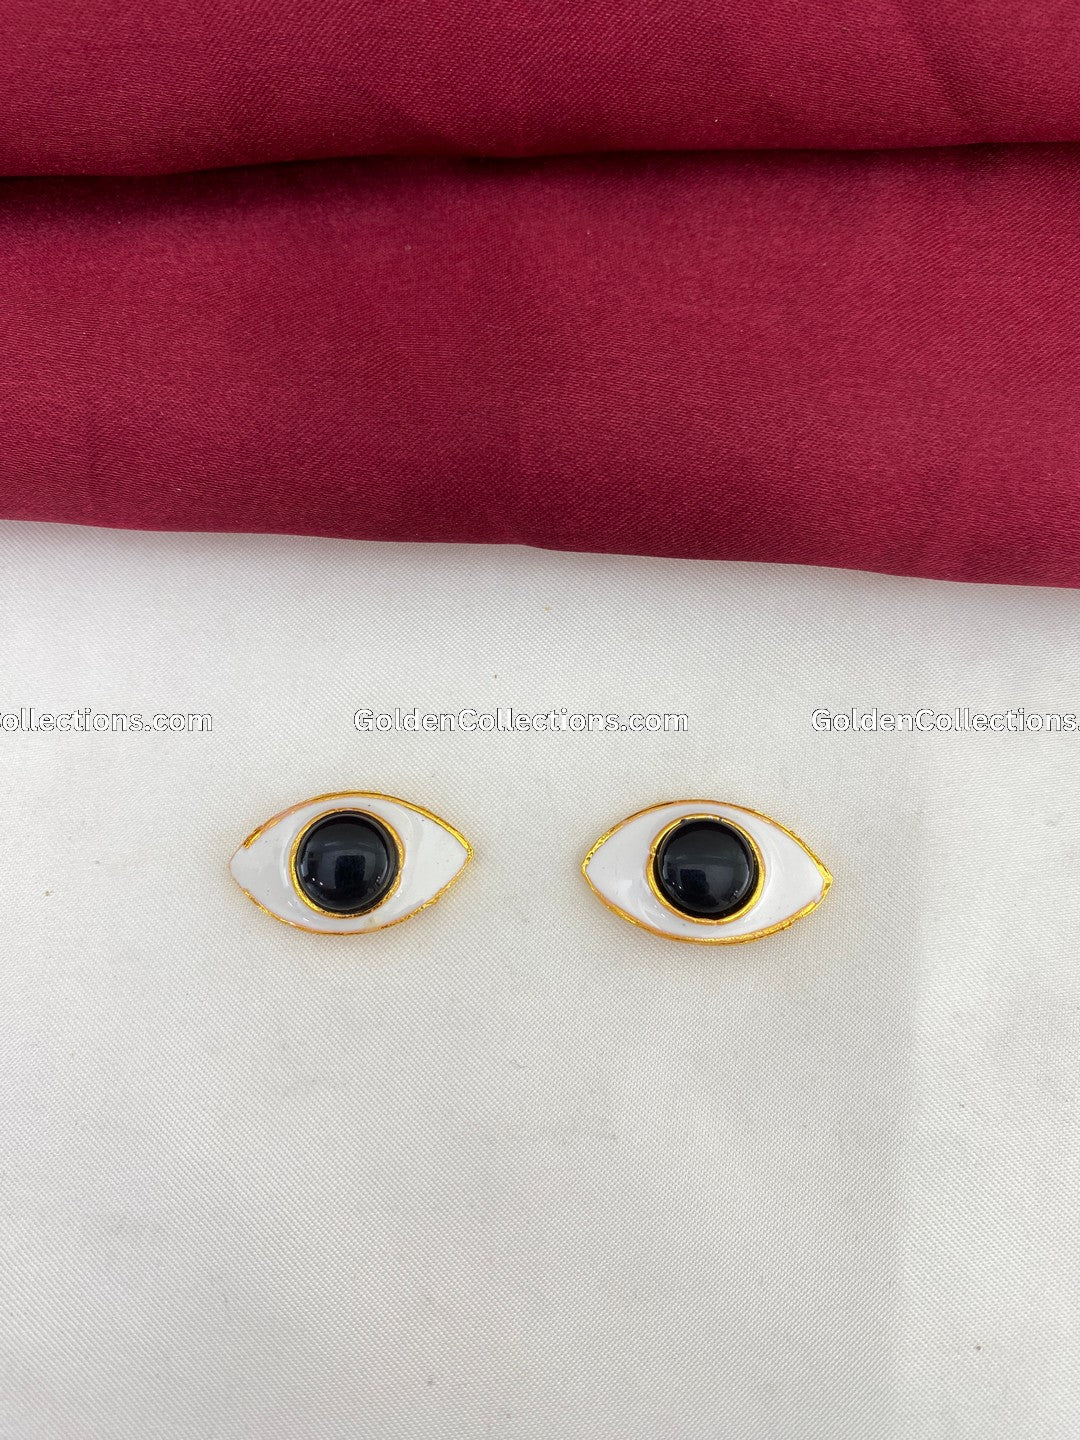 Decorate with Deity Eyes - GoldenCollections DNC-009